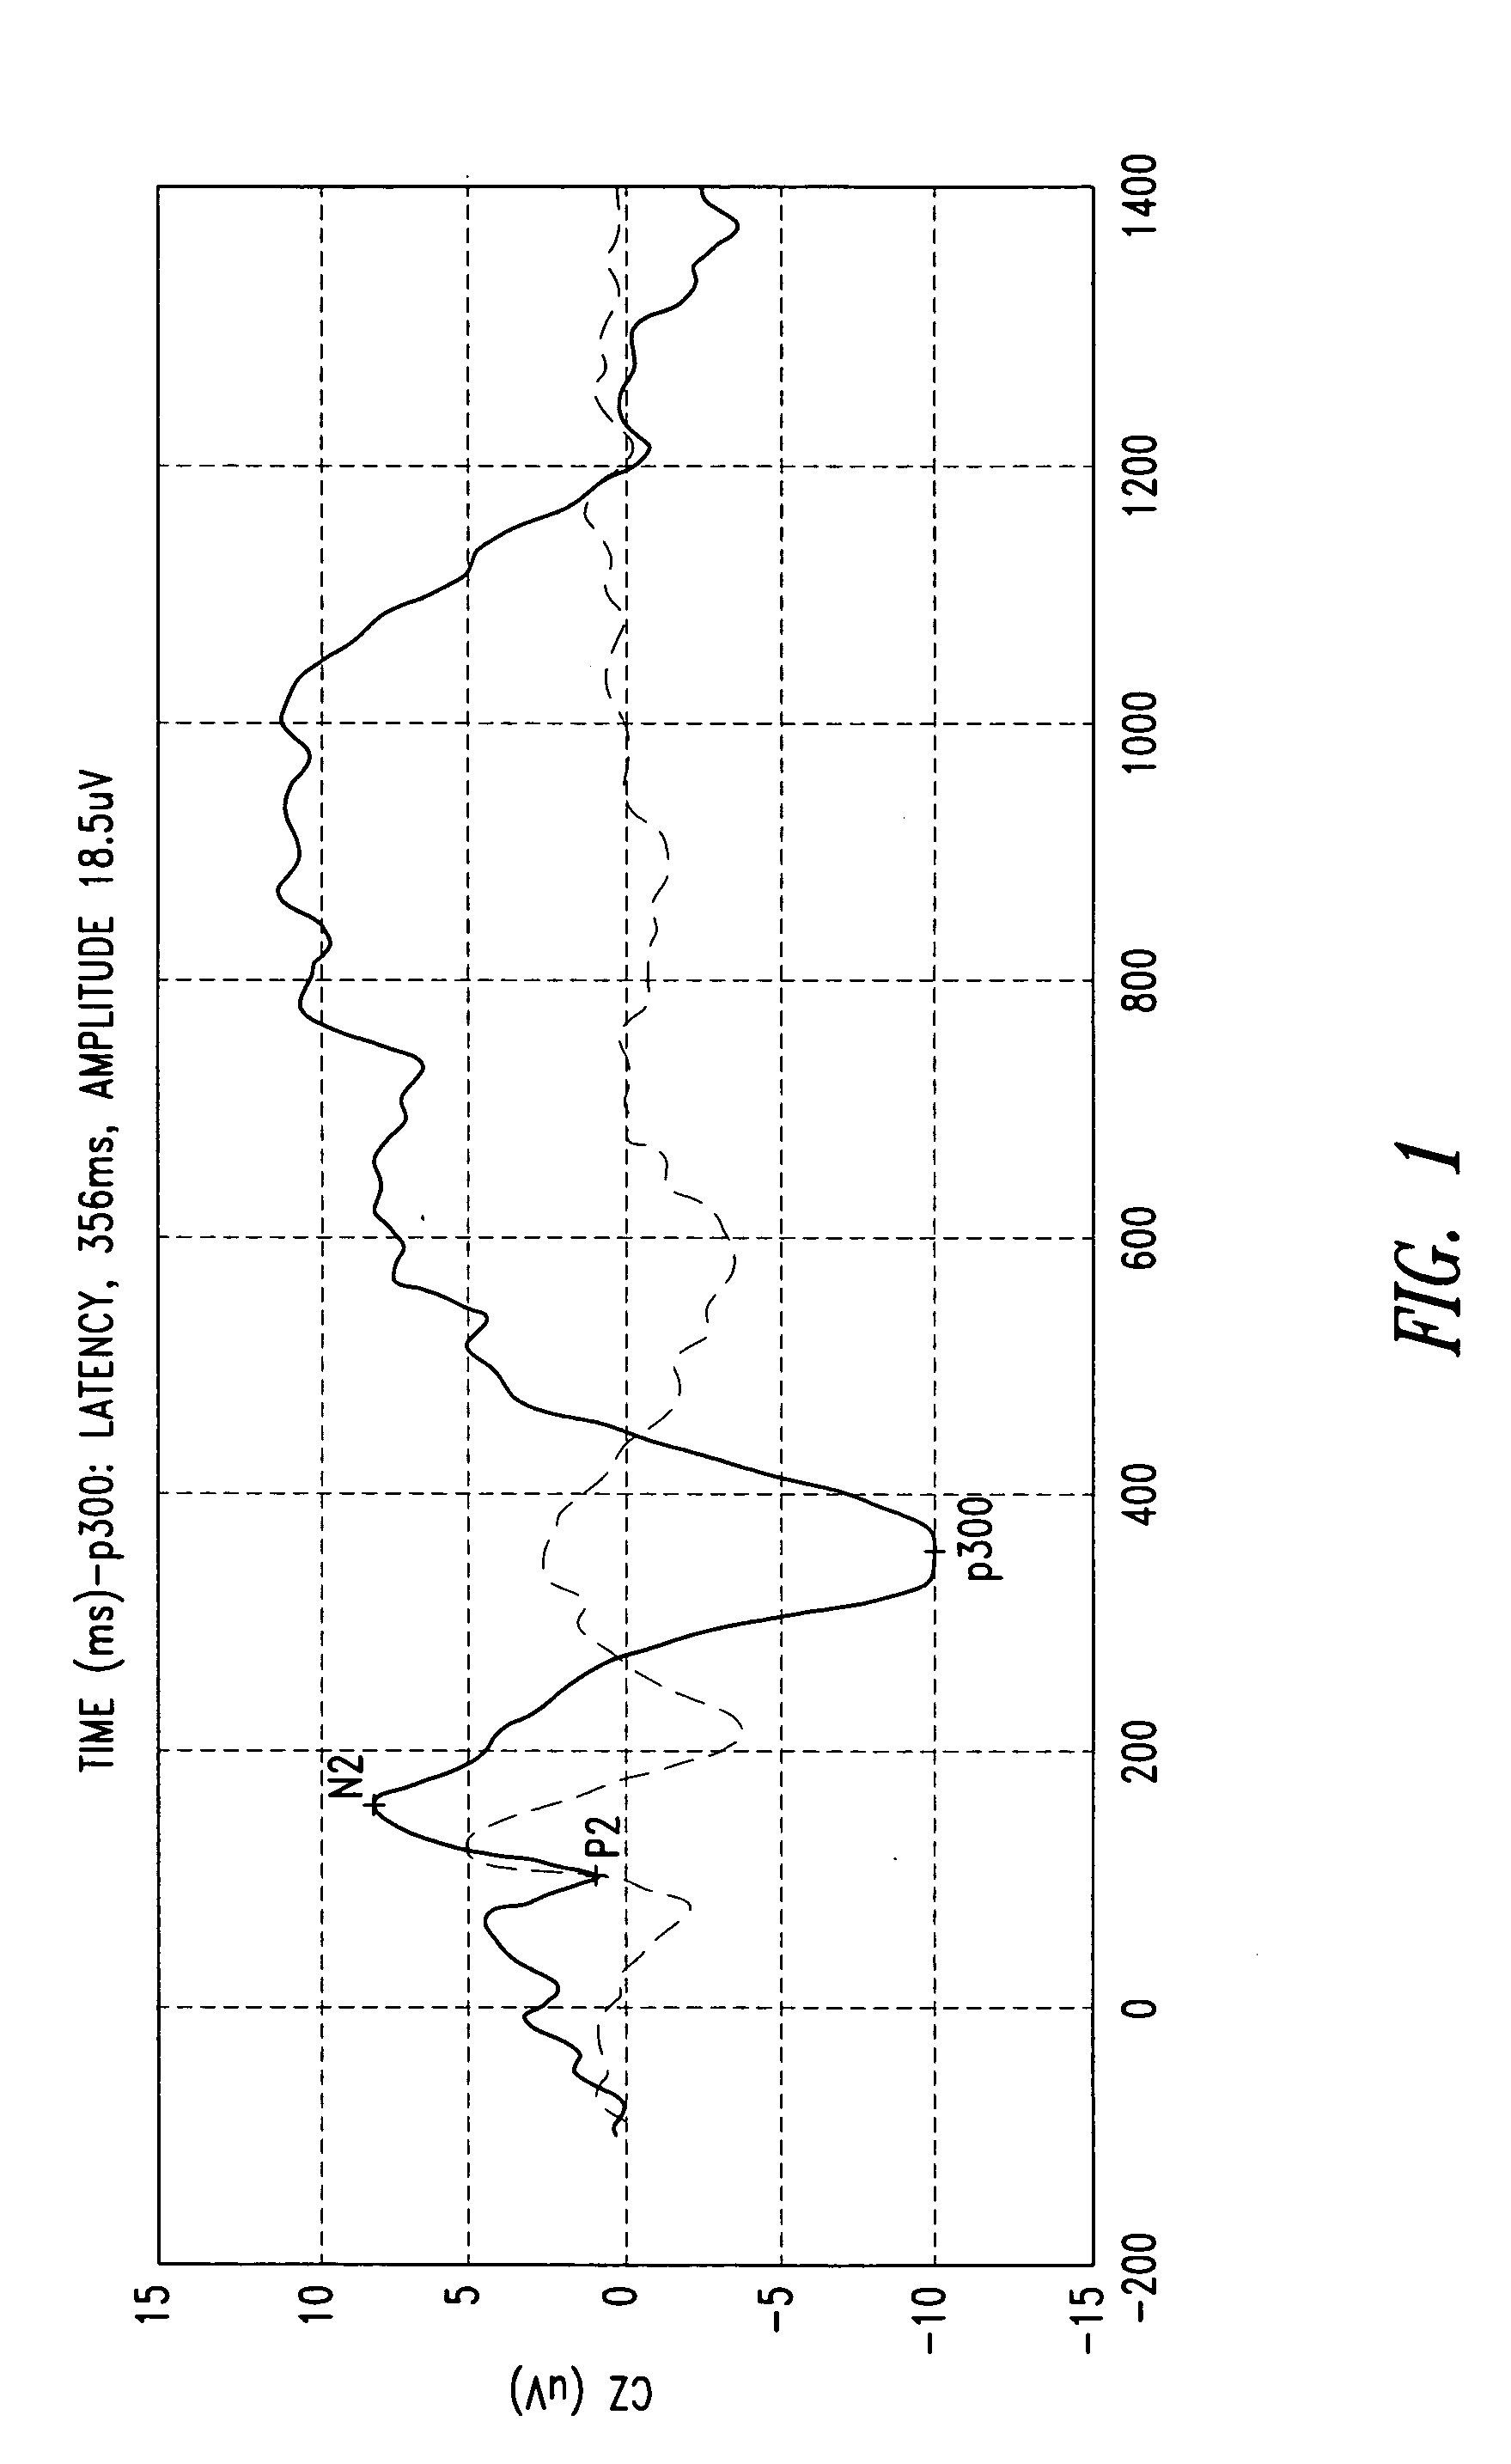 Man-machine interfaces system and method, for instance applications in the area of rehabilitation